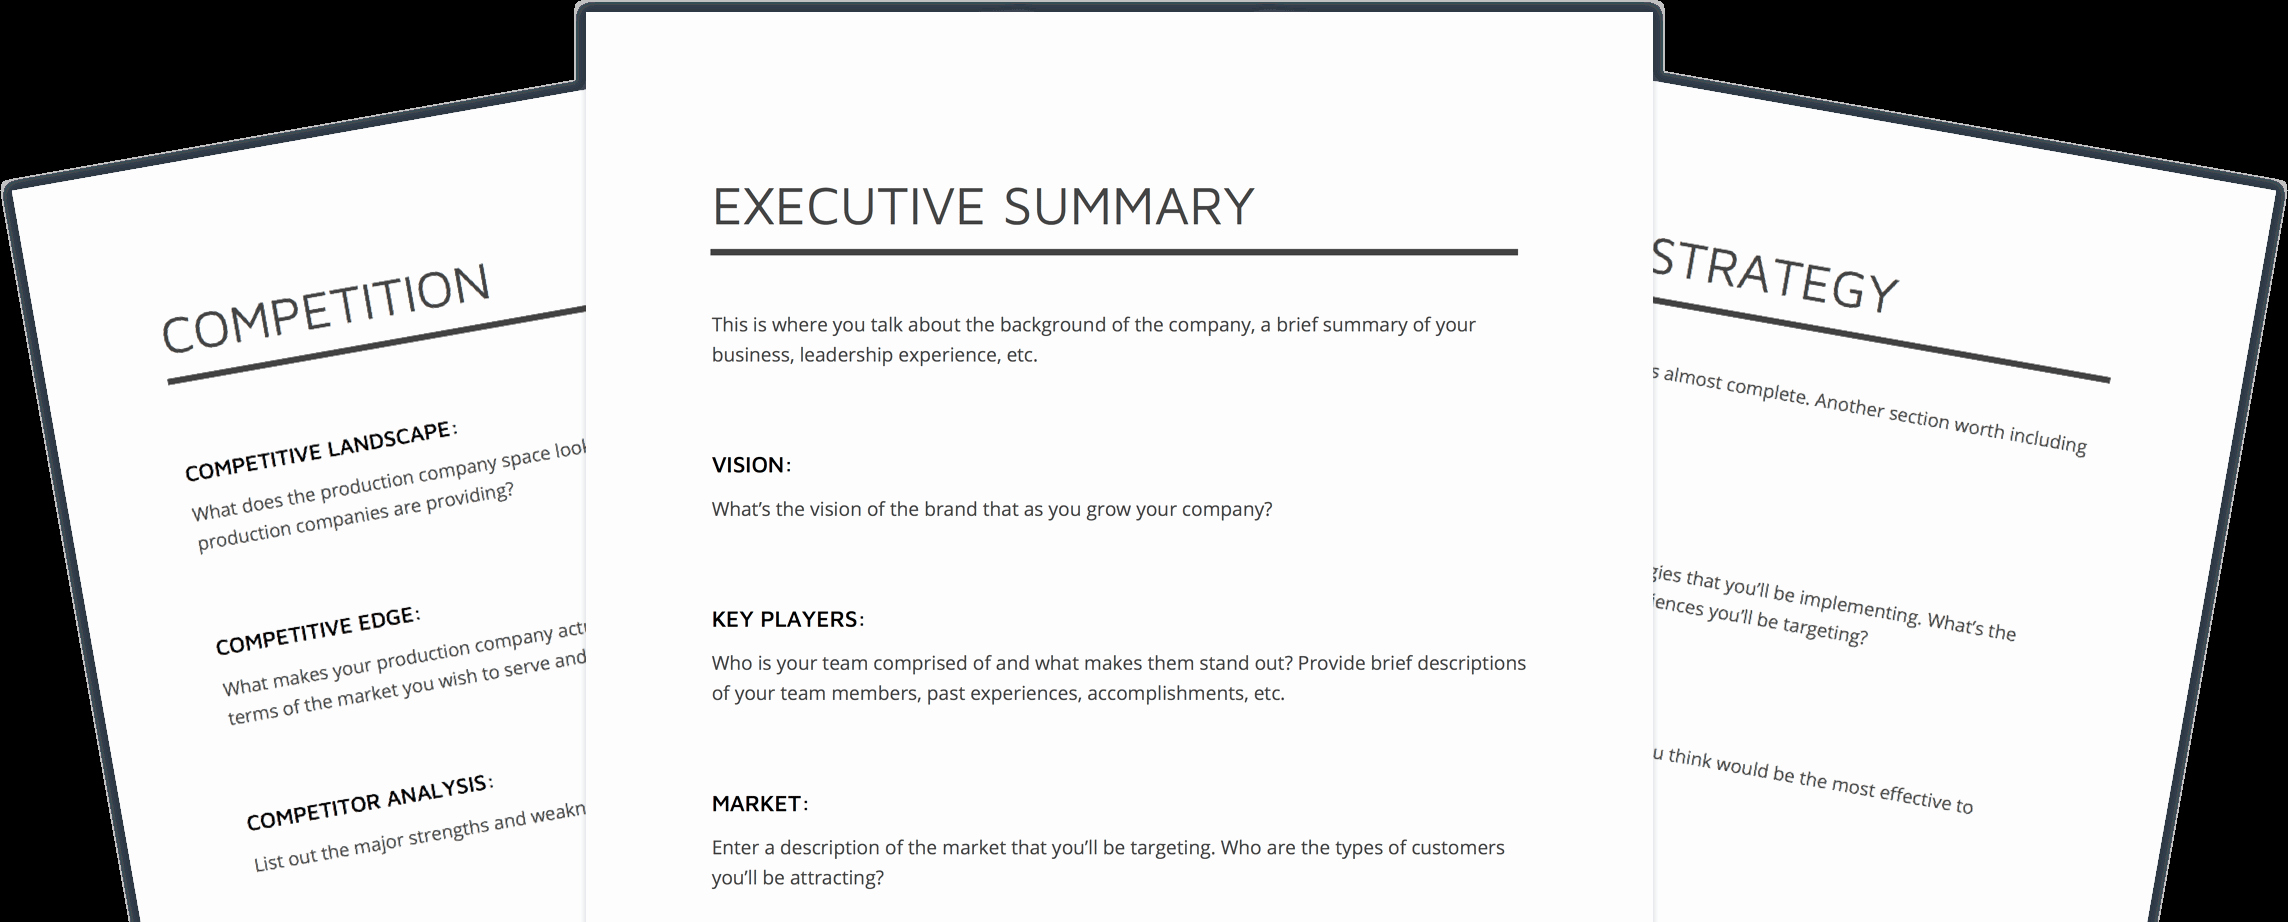 Film Business Plan Template Awesome How to Make A Production Pany Business Plan [free Template]